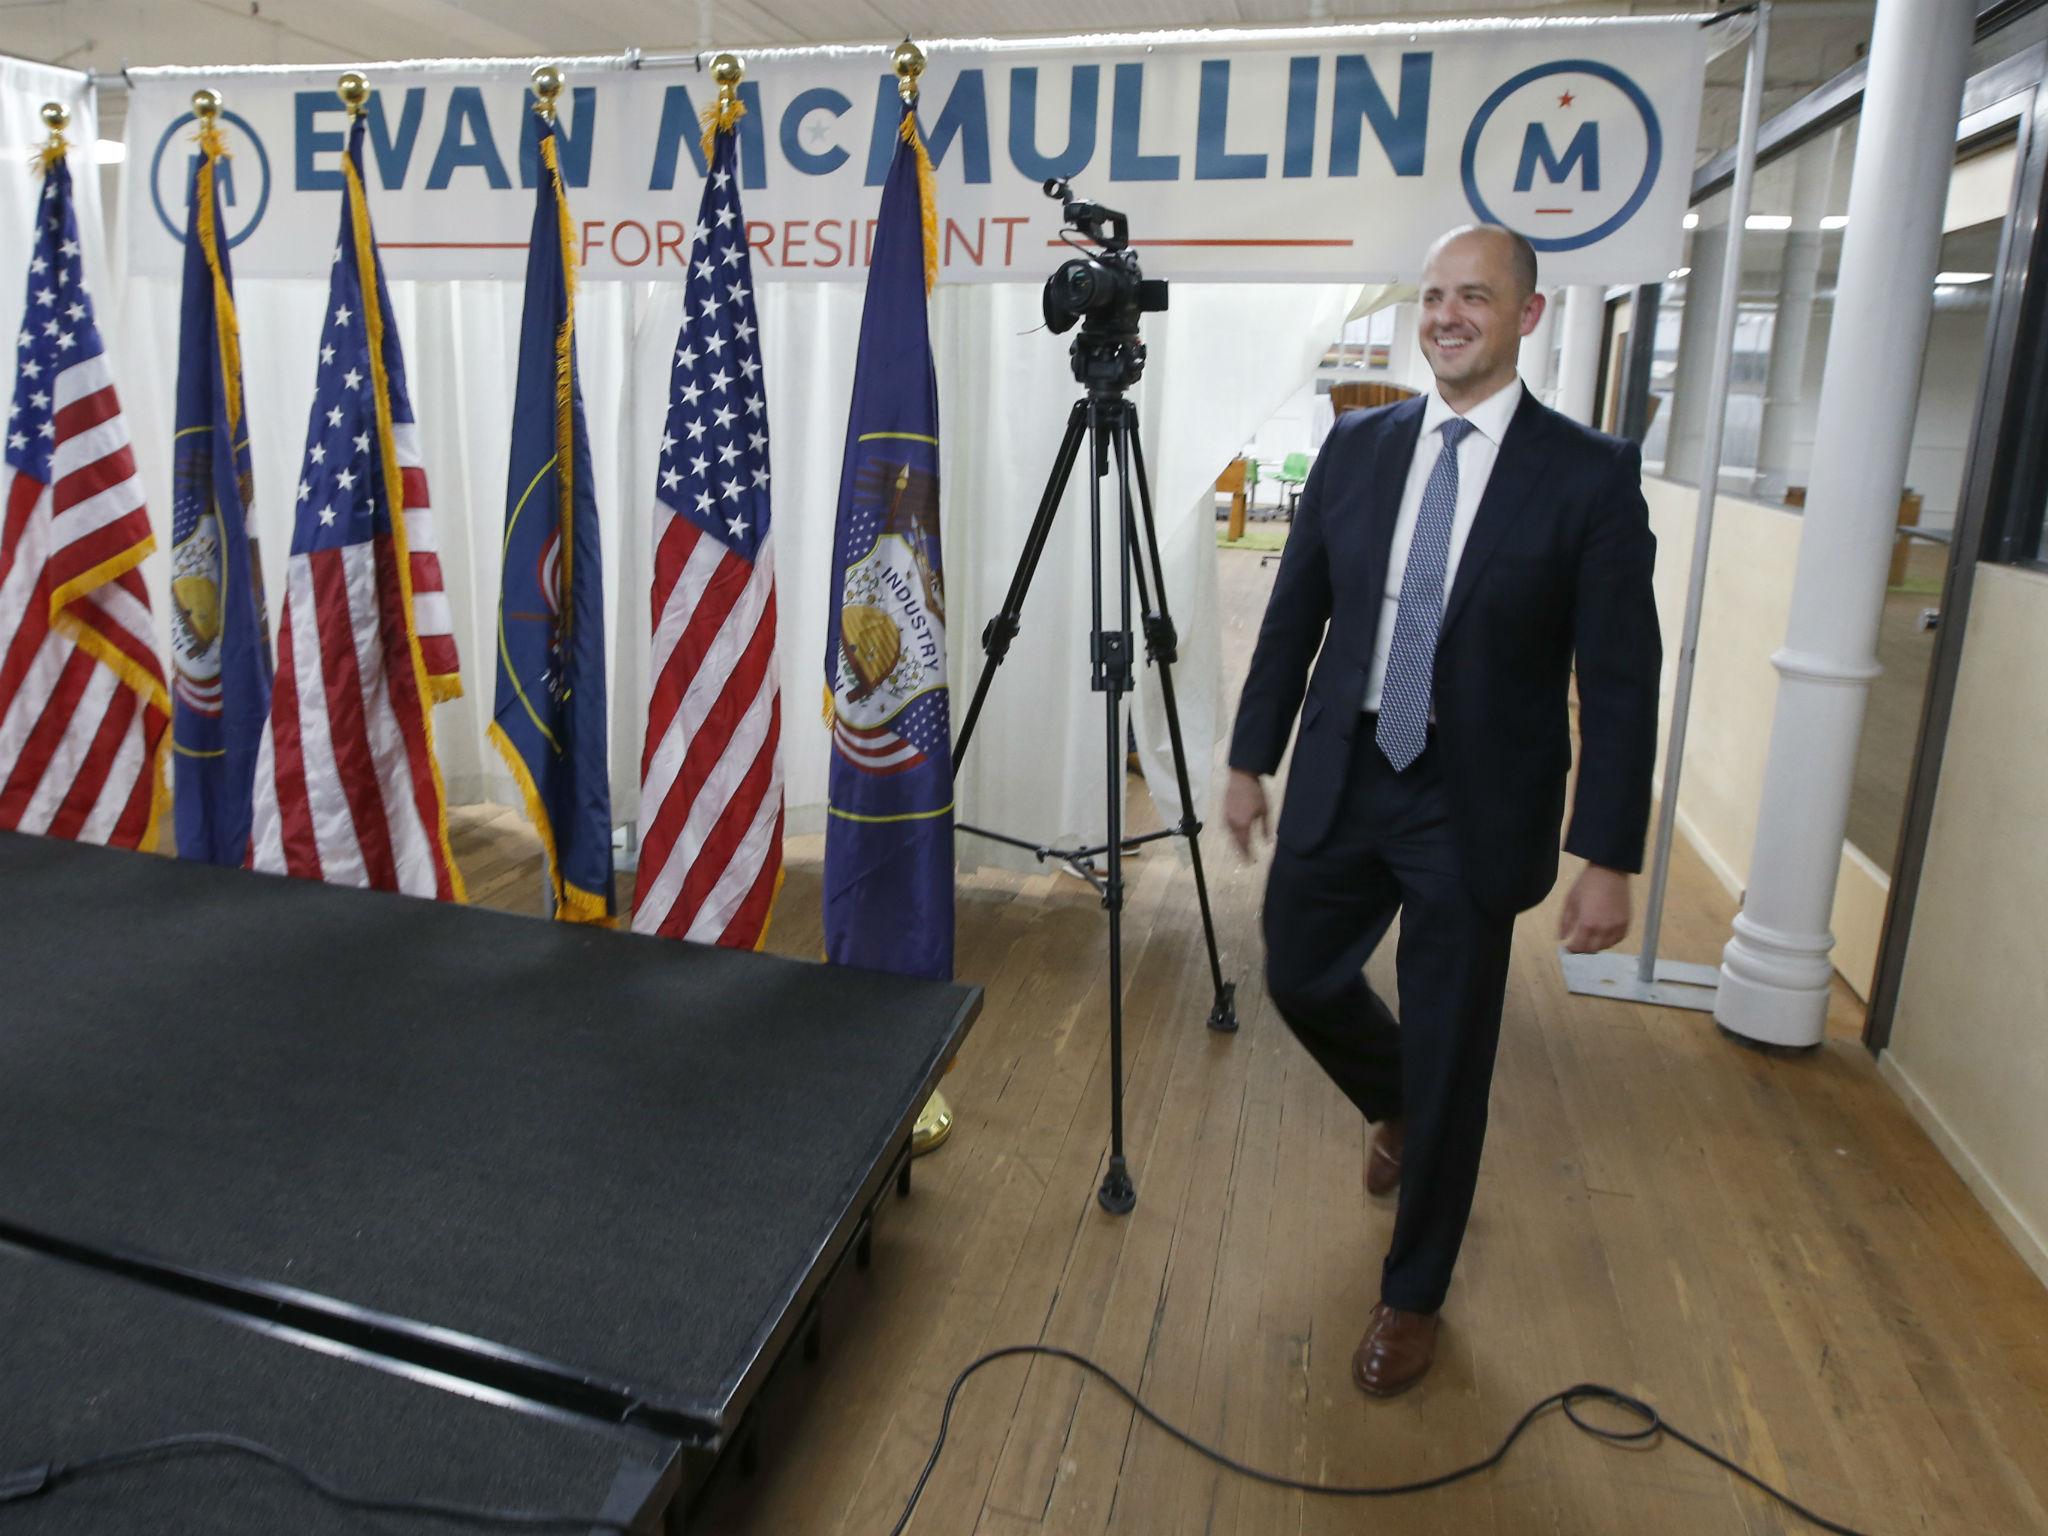 McMullin jumped into the race a few months ago as he was repelled by Trump's 'bigoted' rhetoric